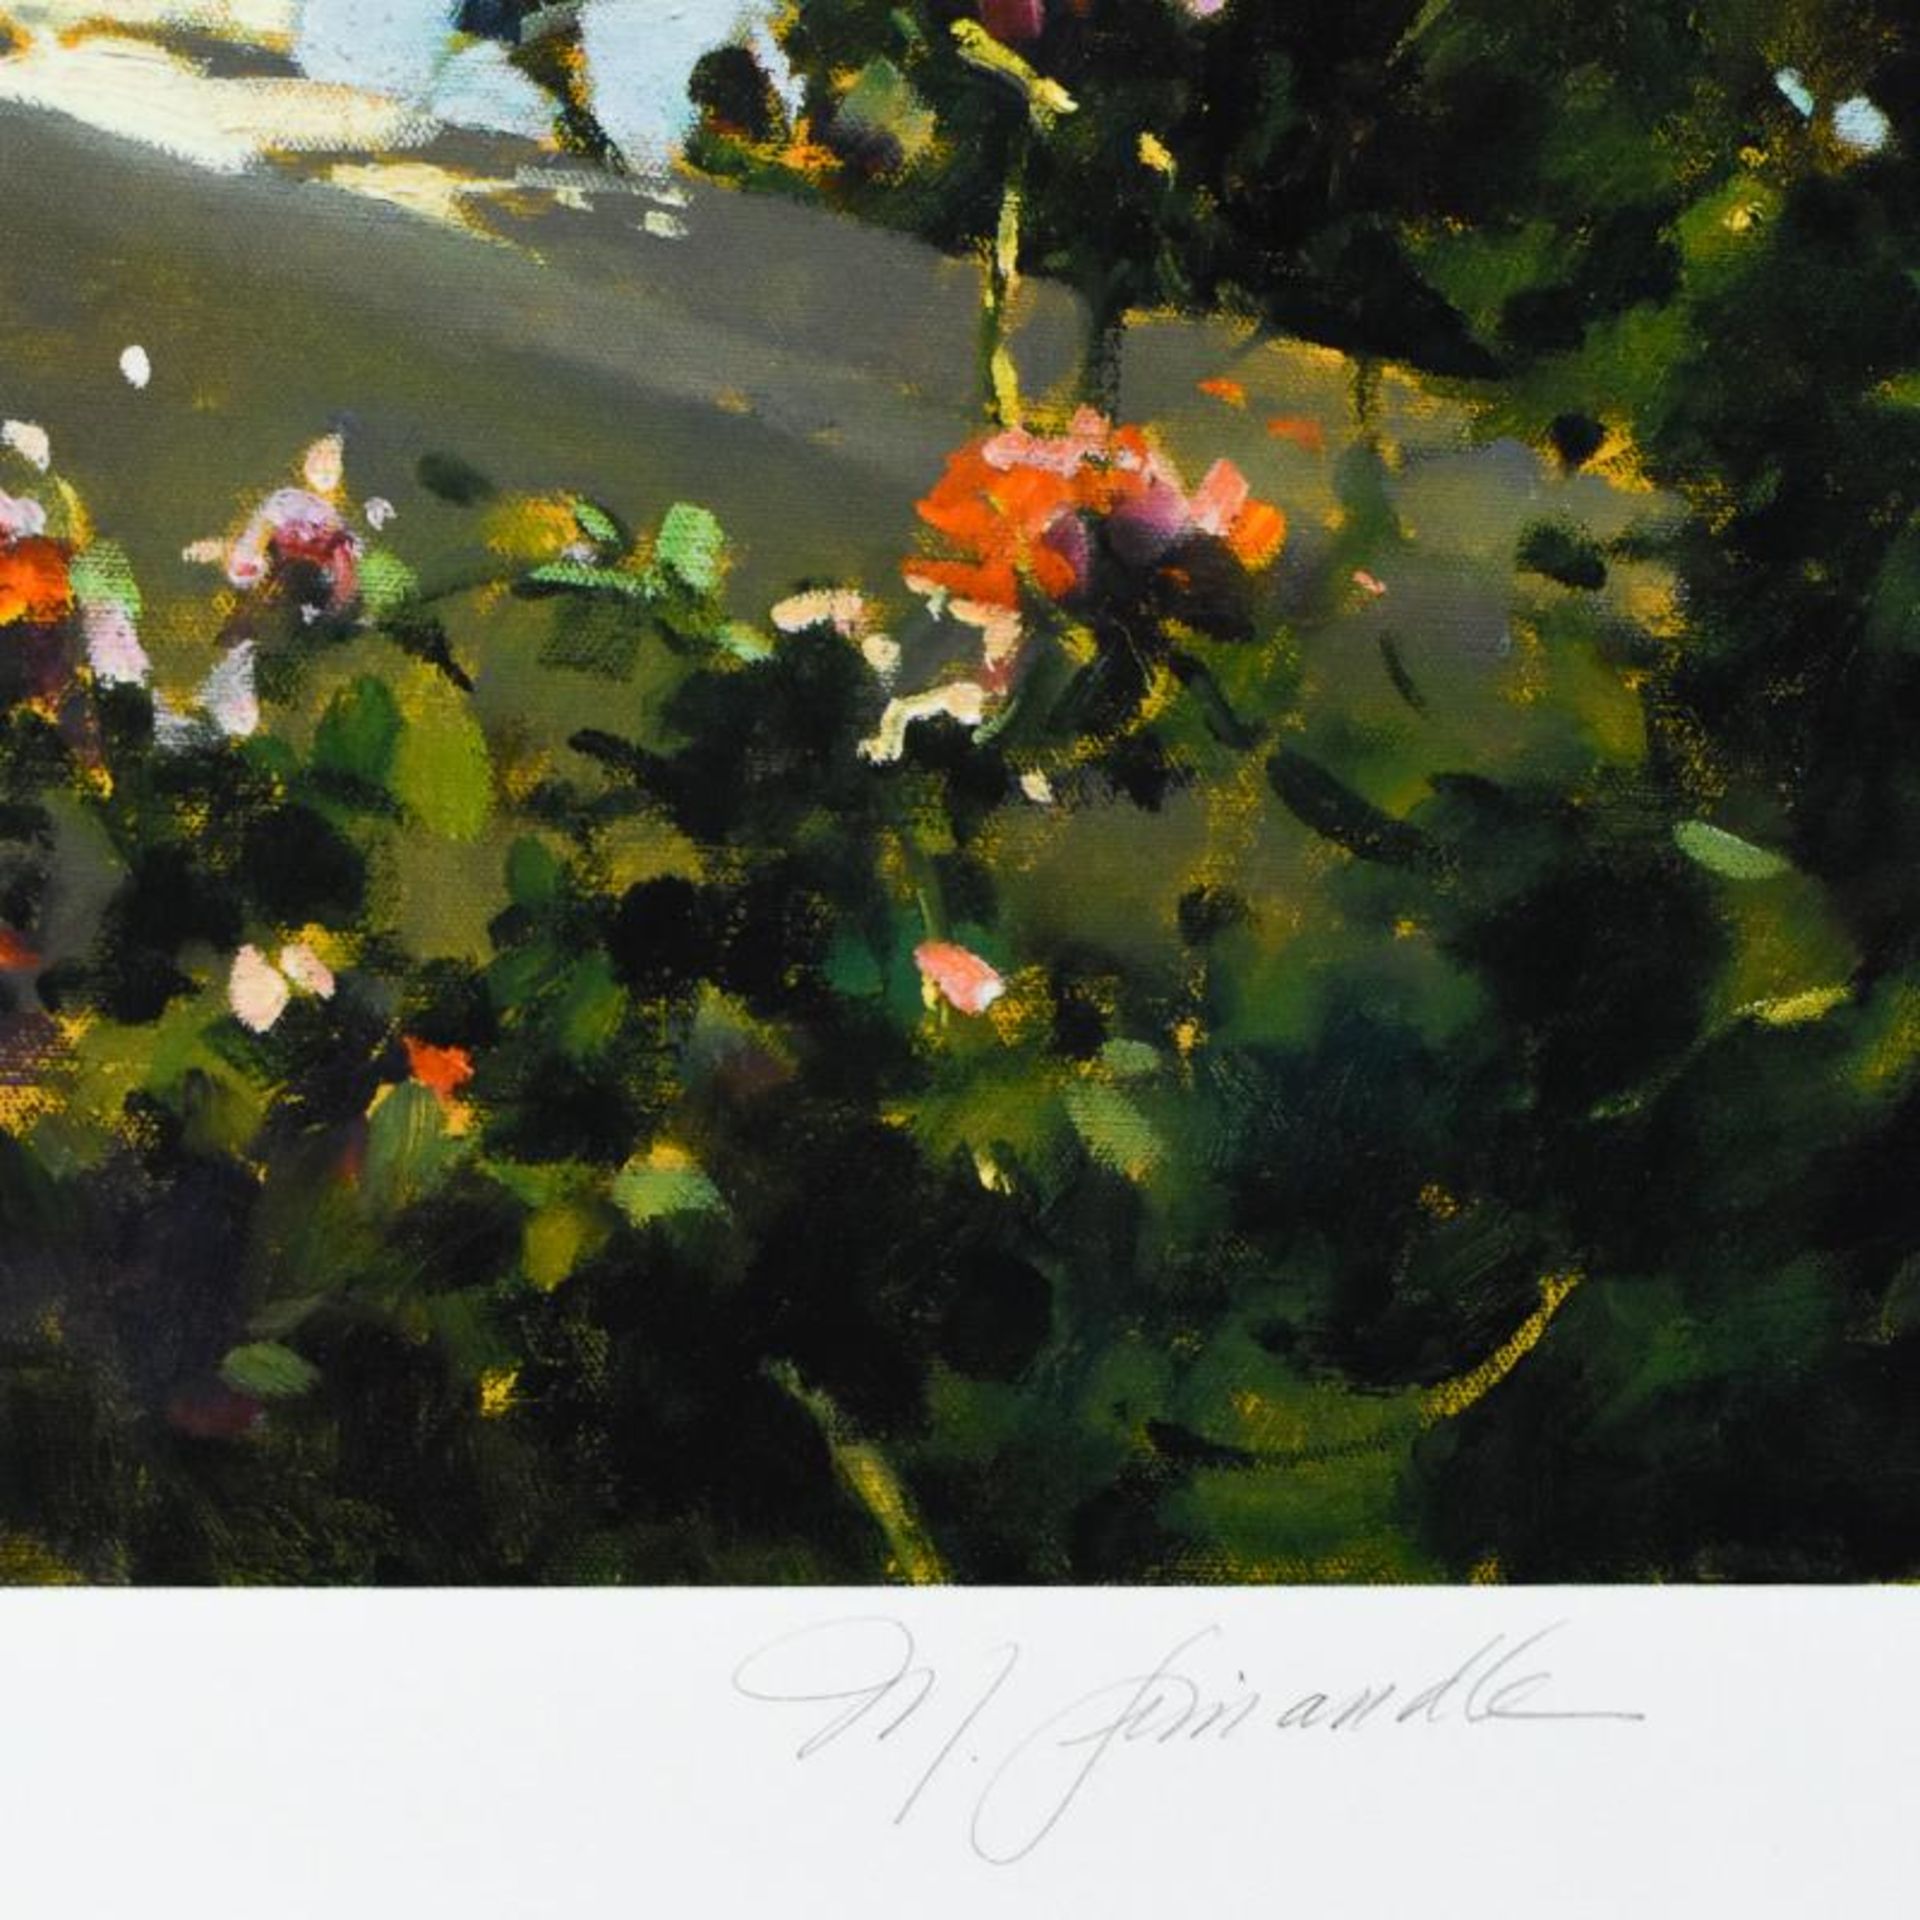 Marilyn Simandle, "Riviera Walk" Limited Edition, Numbered and Hand Signed with - Image 2 of 2